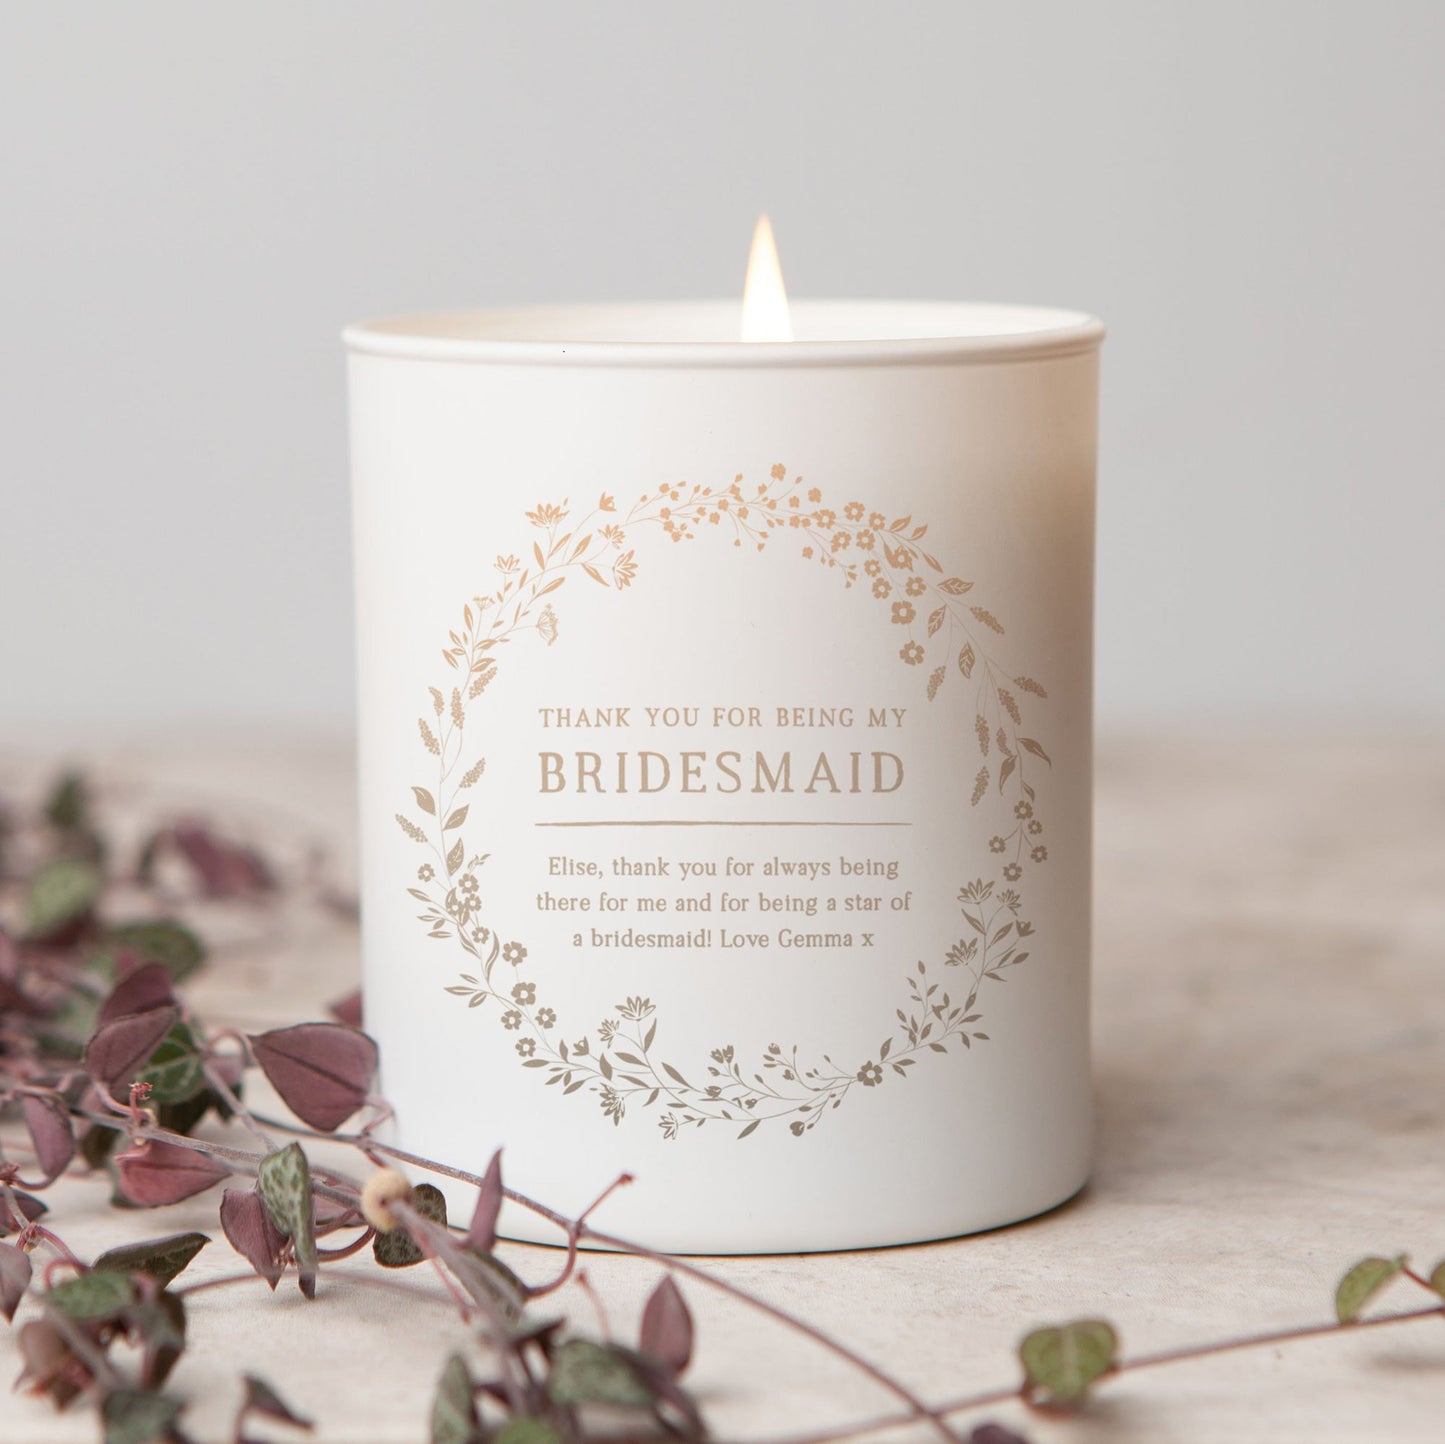 Bridesmaid Gift Scented White Candle - Kindred Fires